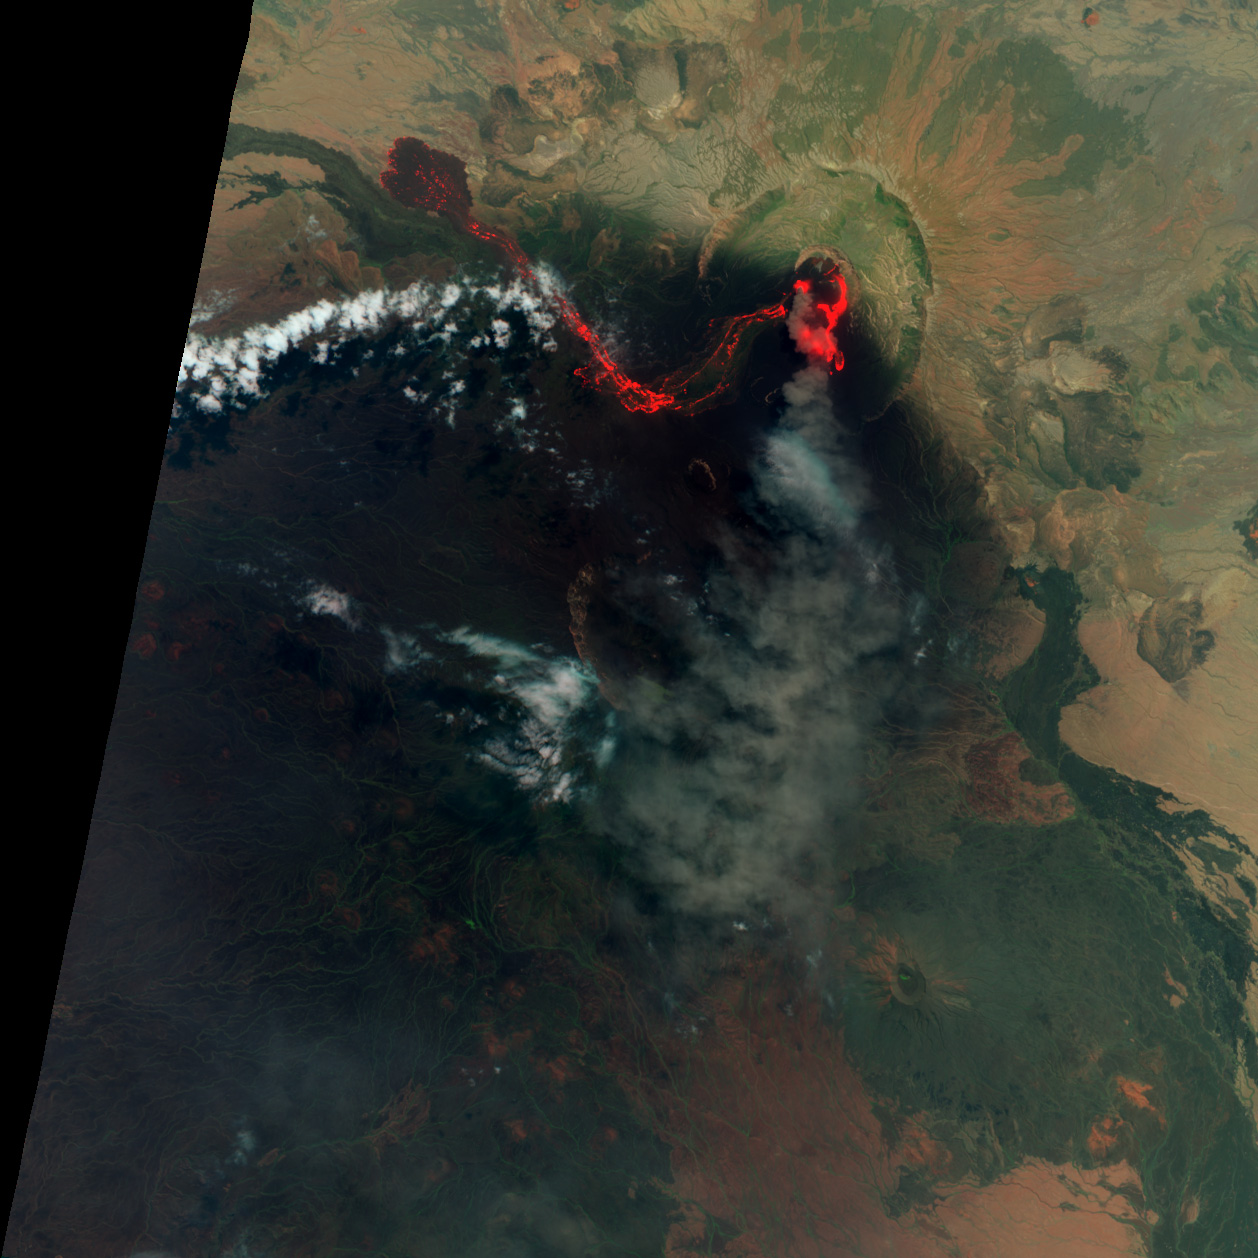 Lava Flows at Nabro Volcano, Eritrea - related image preview